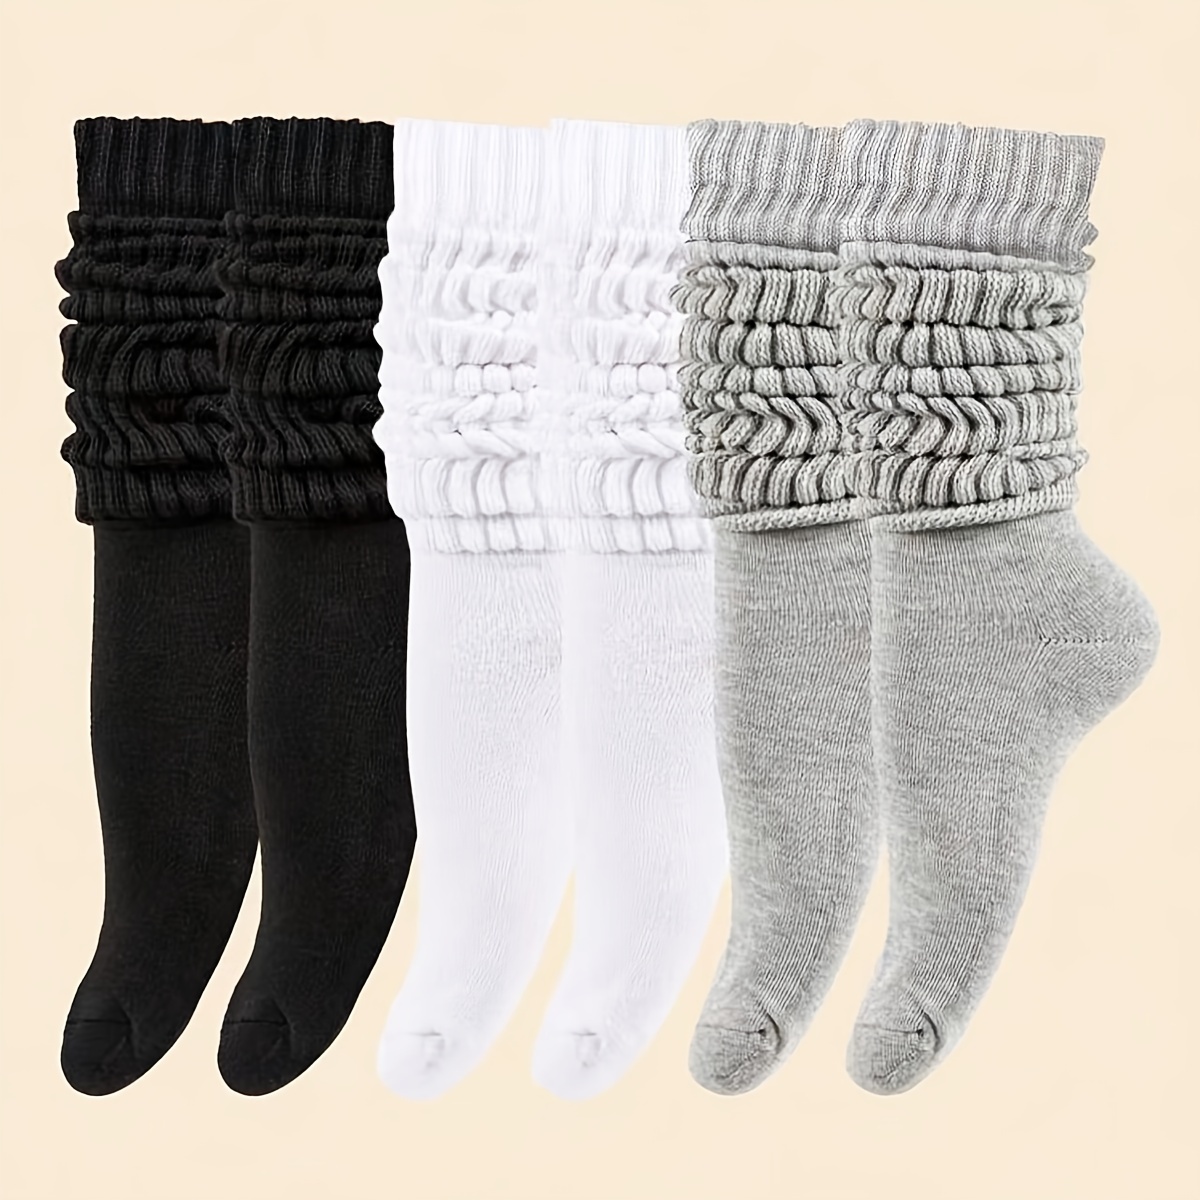 

3 Pairs Women's Trendy Calf Socks Set, Plus Size Solid Scrunch Knitted Soft & Breathable Mid-calf Socks For 0xl-2xl